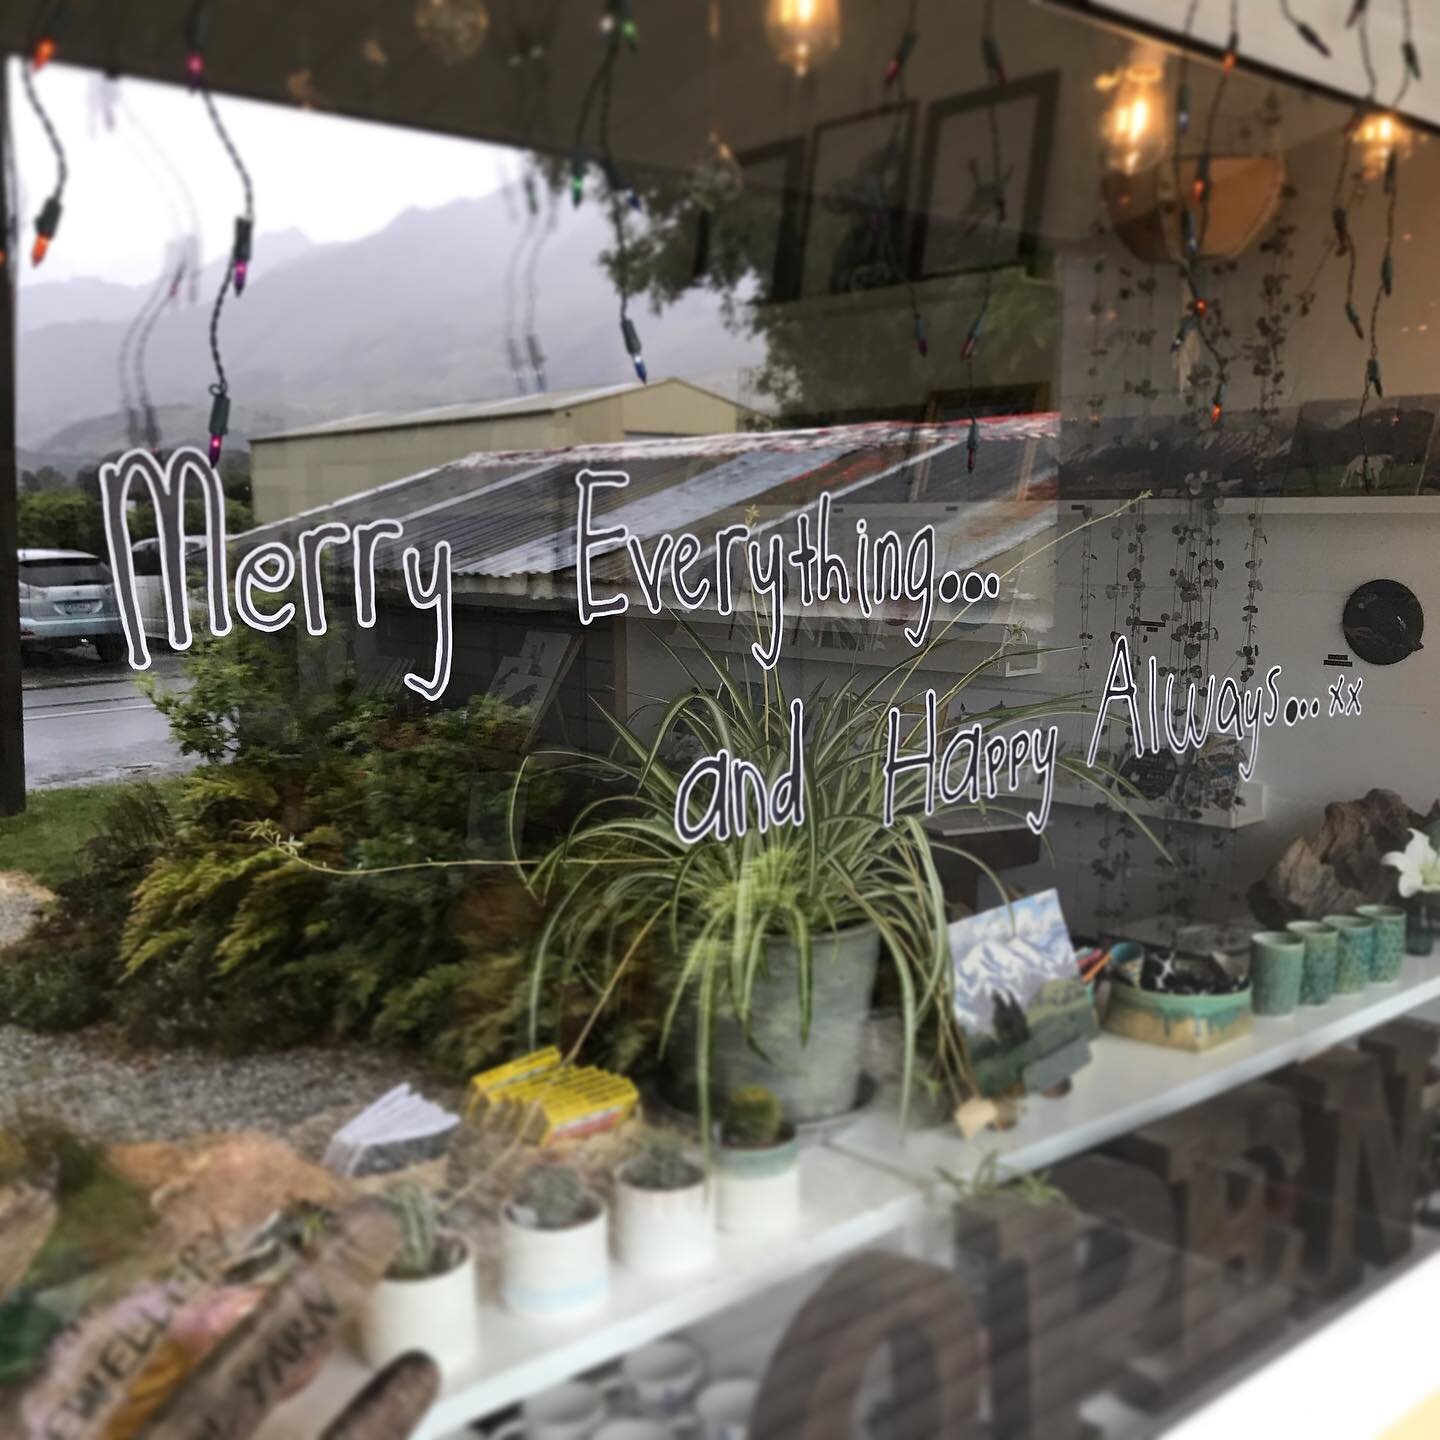 Merry Everything &amp; Happy Always xx ❤️ We&rsquo;ll be closed the 25&amp;26 and look forward to seeing you back on the 27th. Feeling extra grateful ✨ 
.
Thank you Helen @tinchdesign for the epic window decal. I&rsquo;ve watched it bring big smiles 